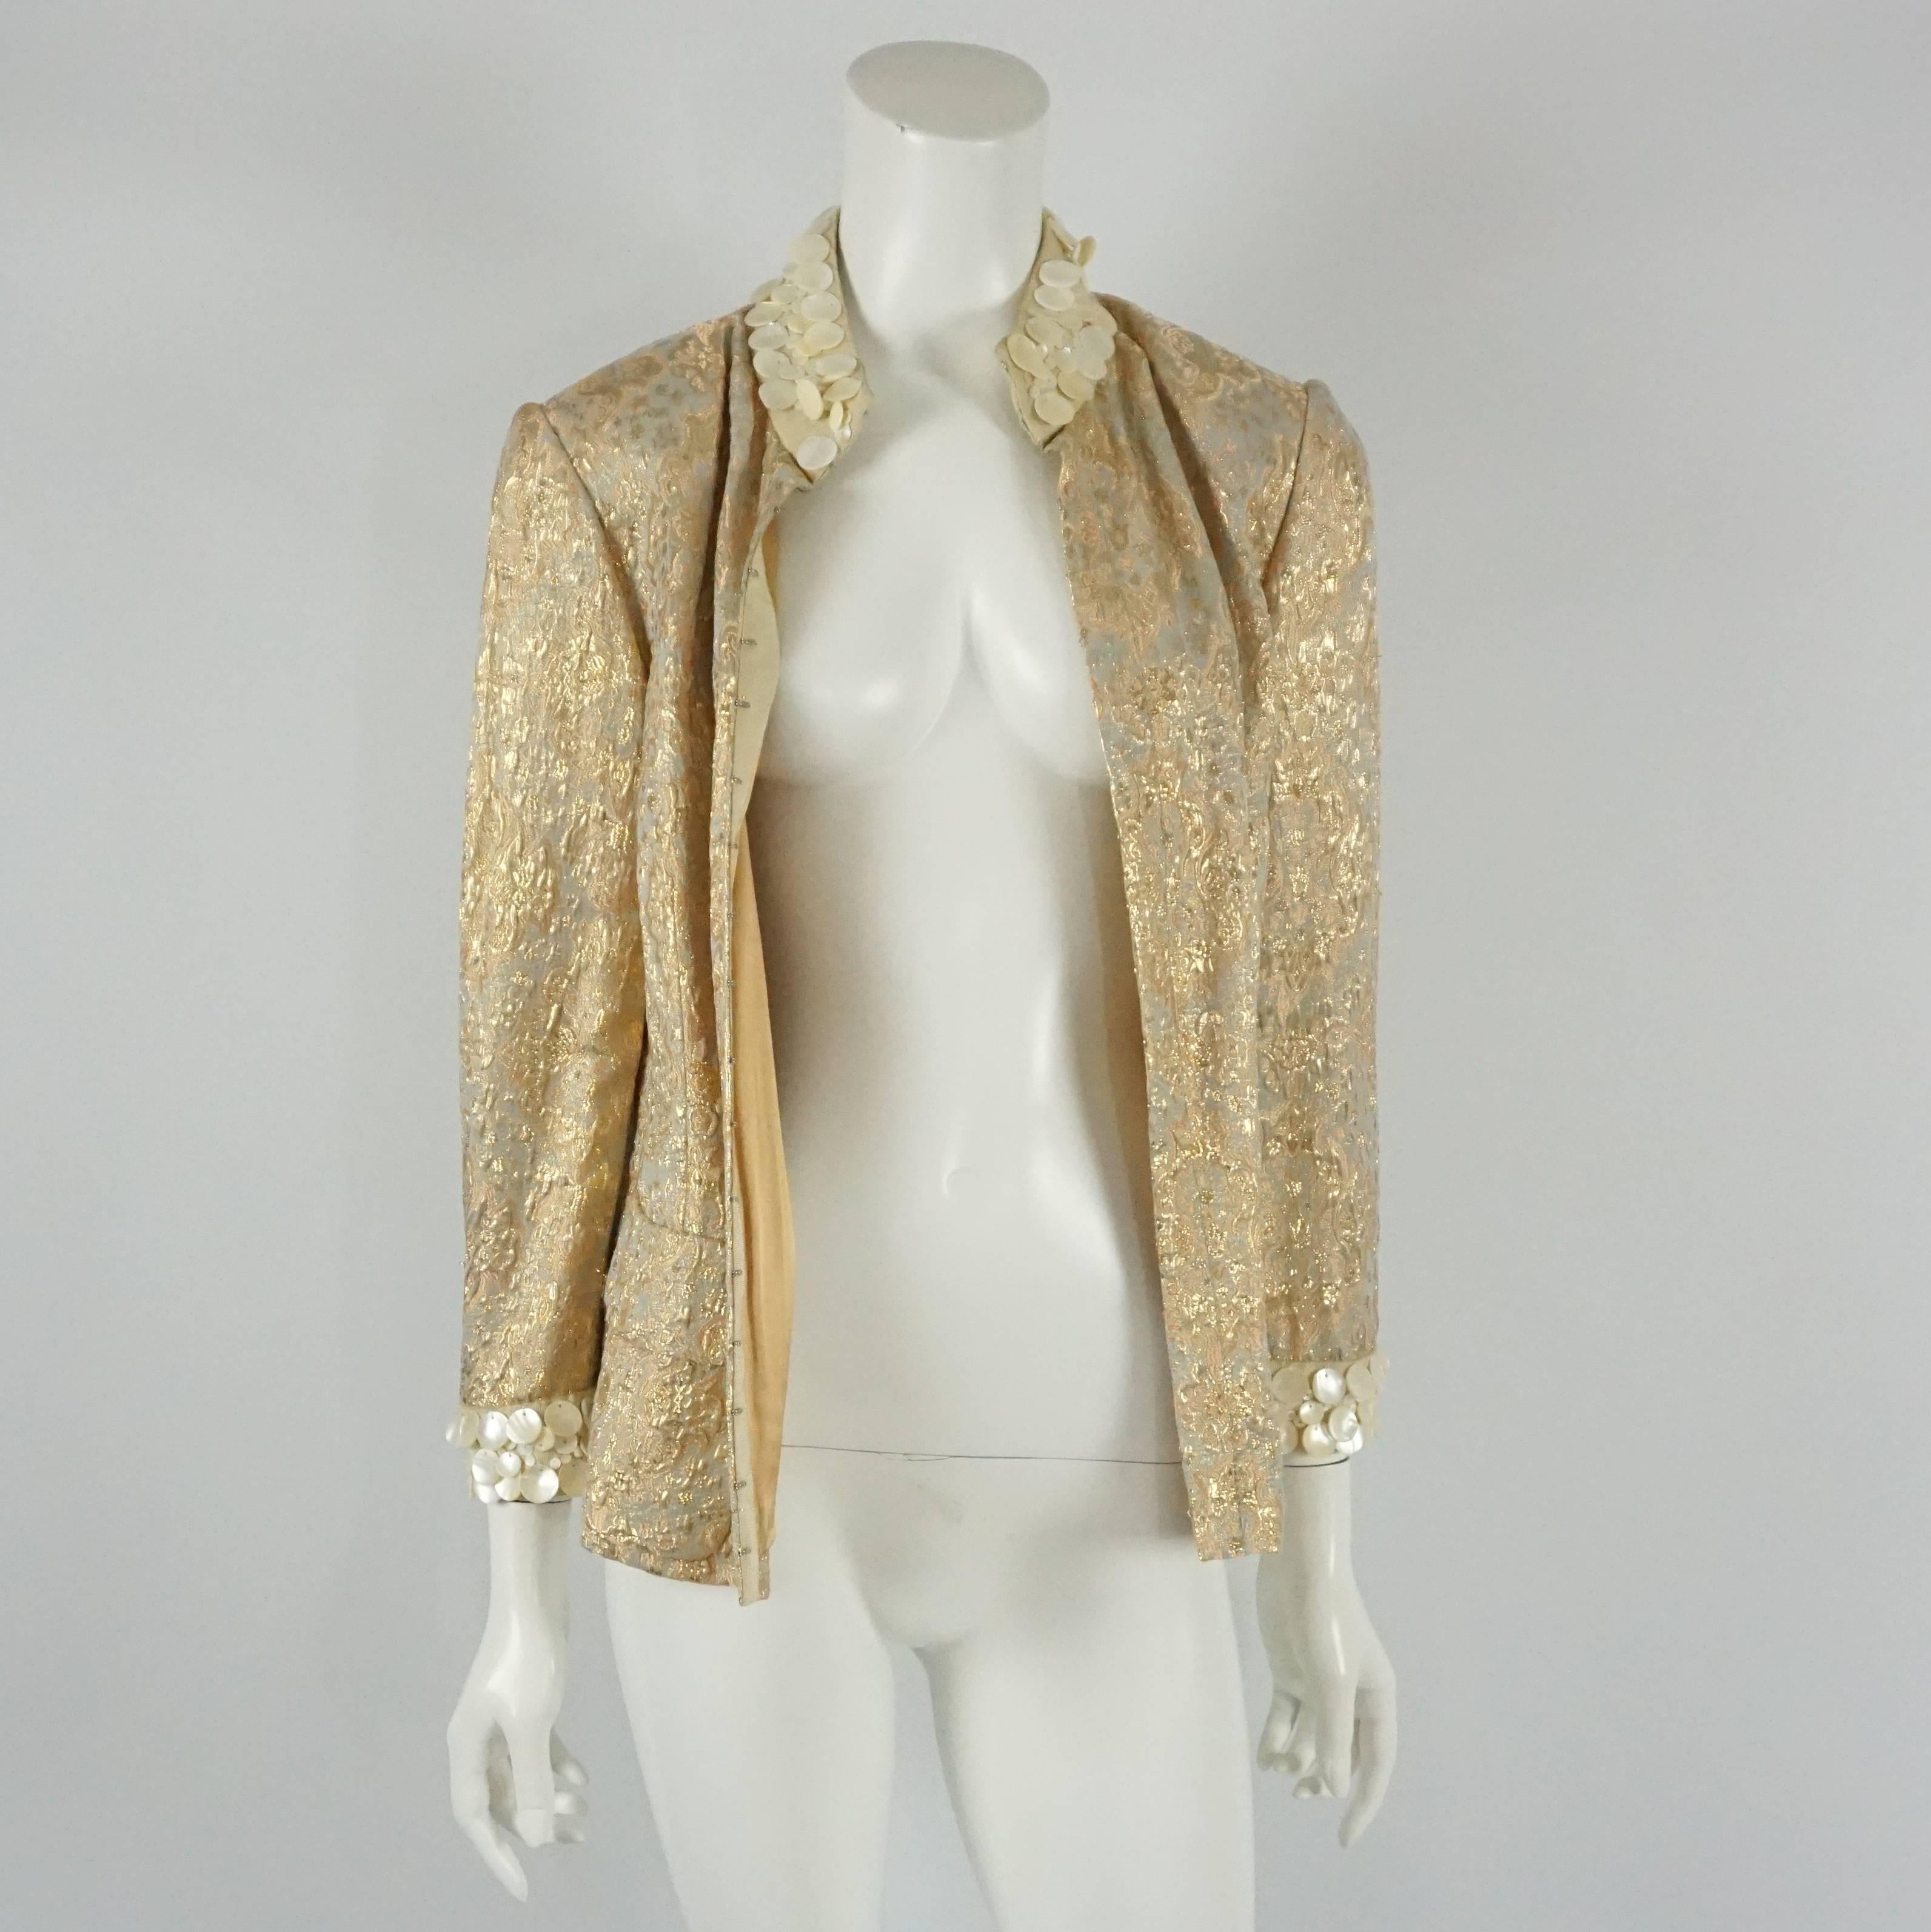 Dolce & Gabanna Silk Gold Brocade Jacket with mother of pearl trim - 44  This spectacular jacket is a must have for every fashionista. The fabric of the jacket has a light sage background with gold and rose gold detail, the cuffs and neckline have a